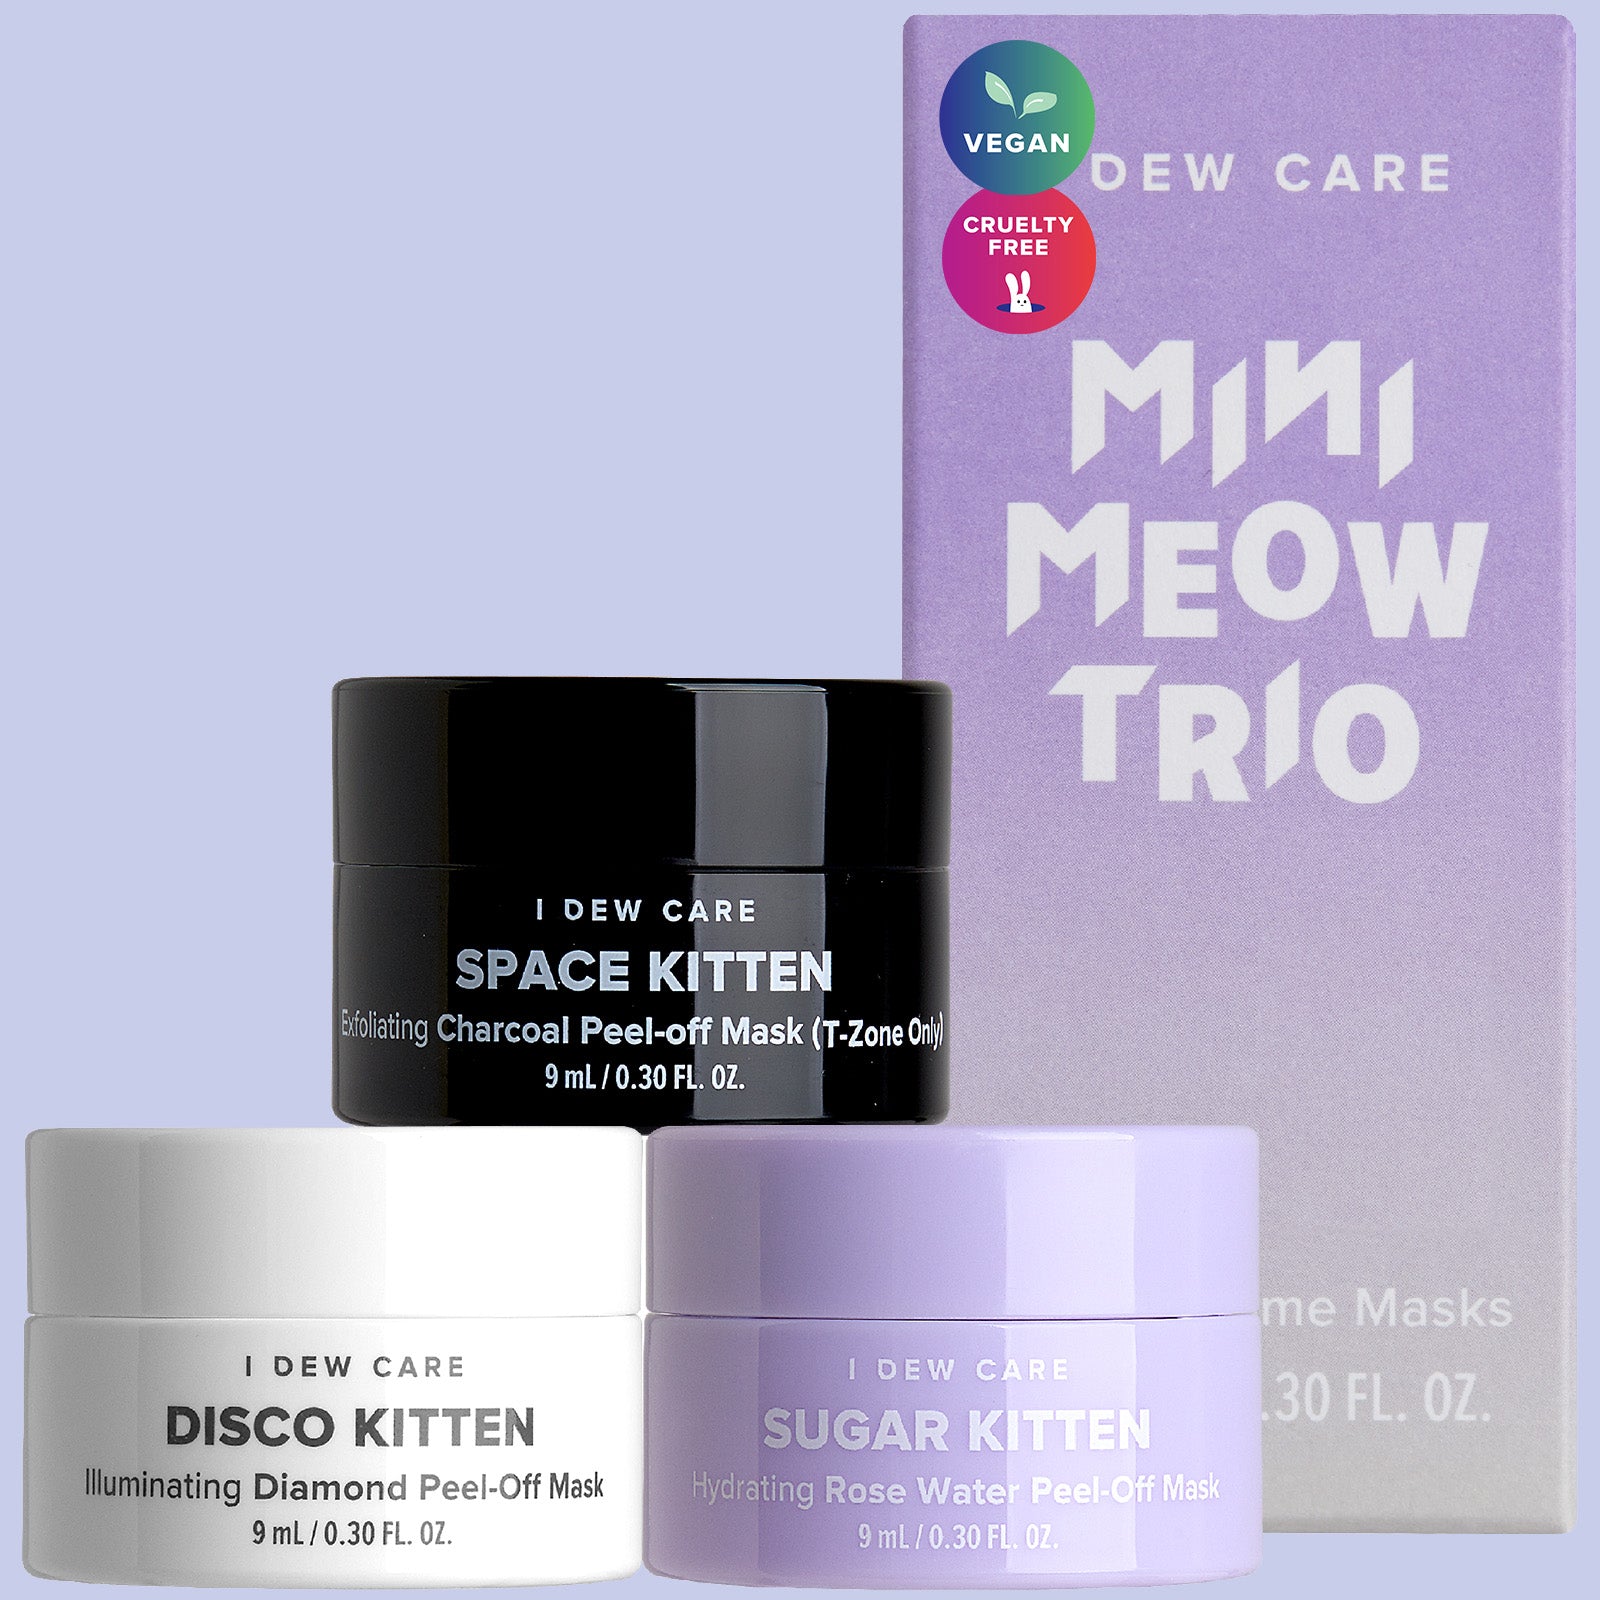 I Dew Care Sugar Kitten Hydrating Holographic Peel-Off Mask